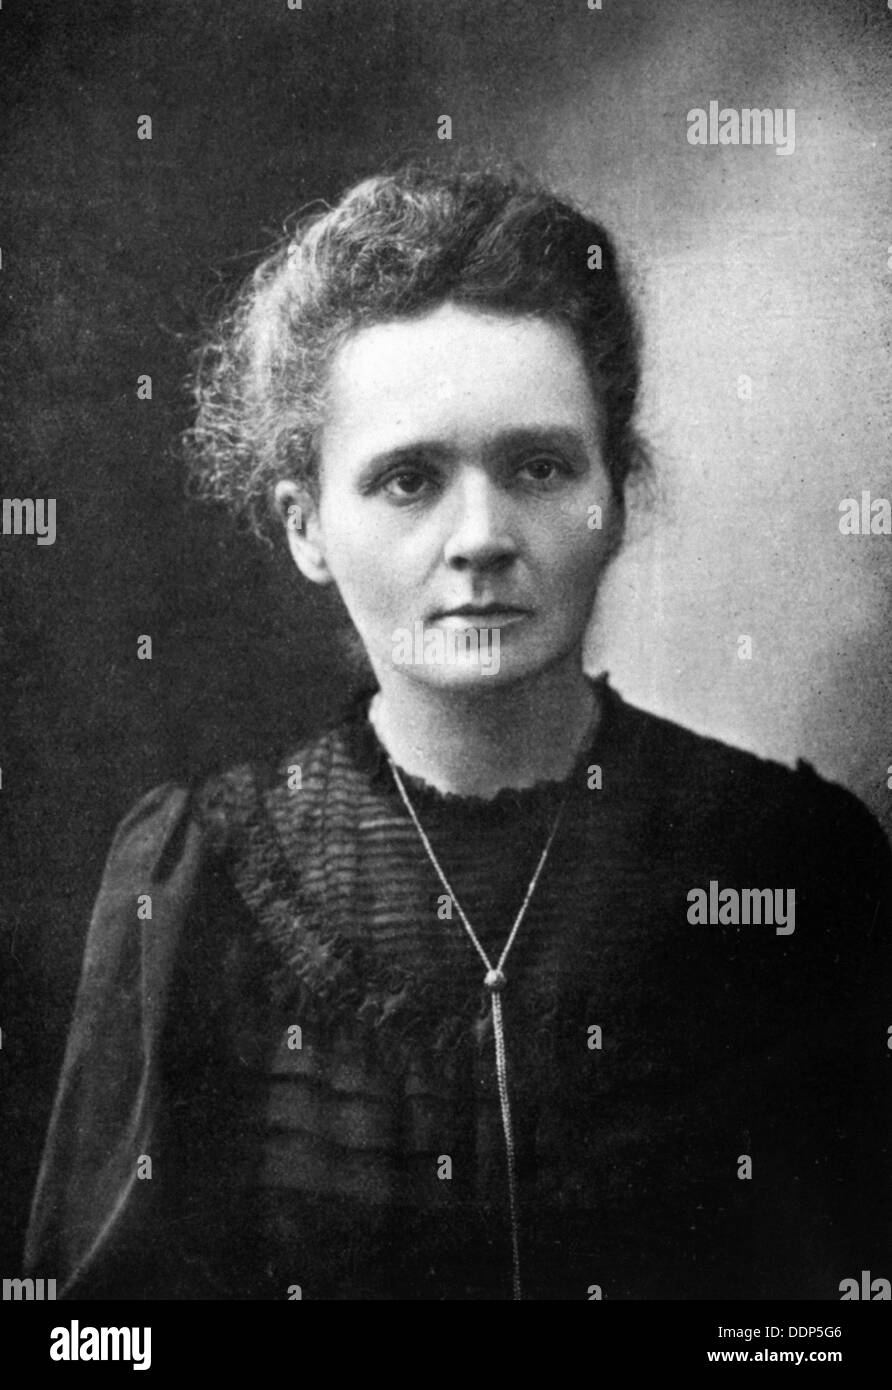 Marie Curie - fisico francese - 1917 Foto Stock